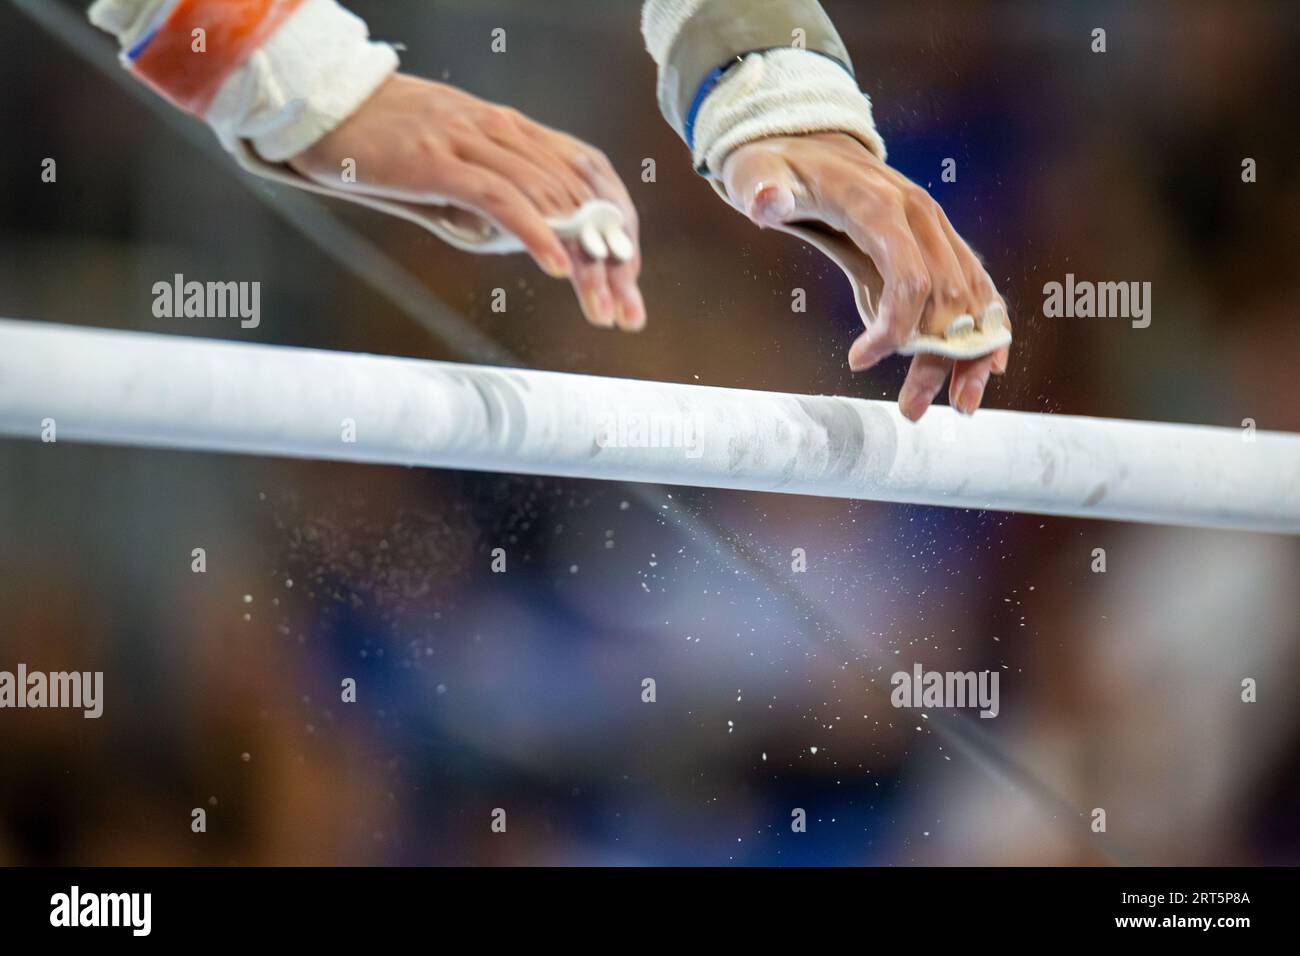 Symbol image of apparatus gymnastics: close-up of a gymnast on the uneven bars Stock Photo